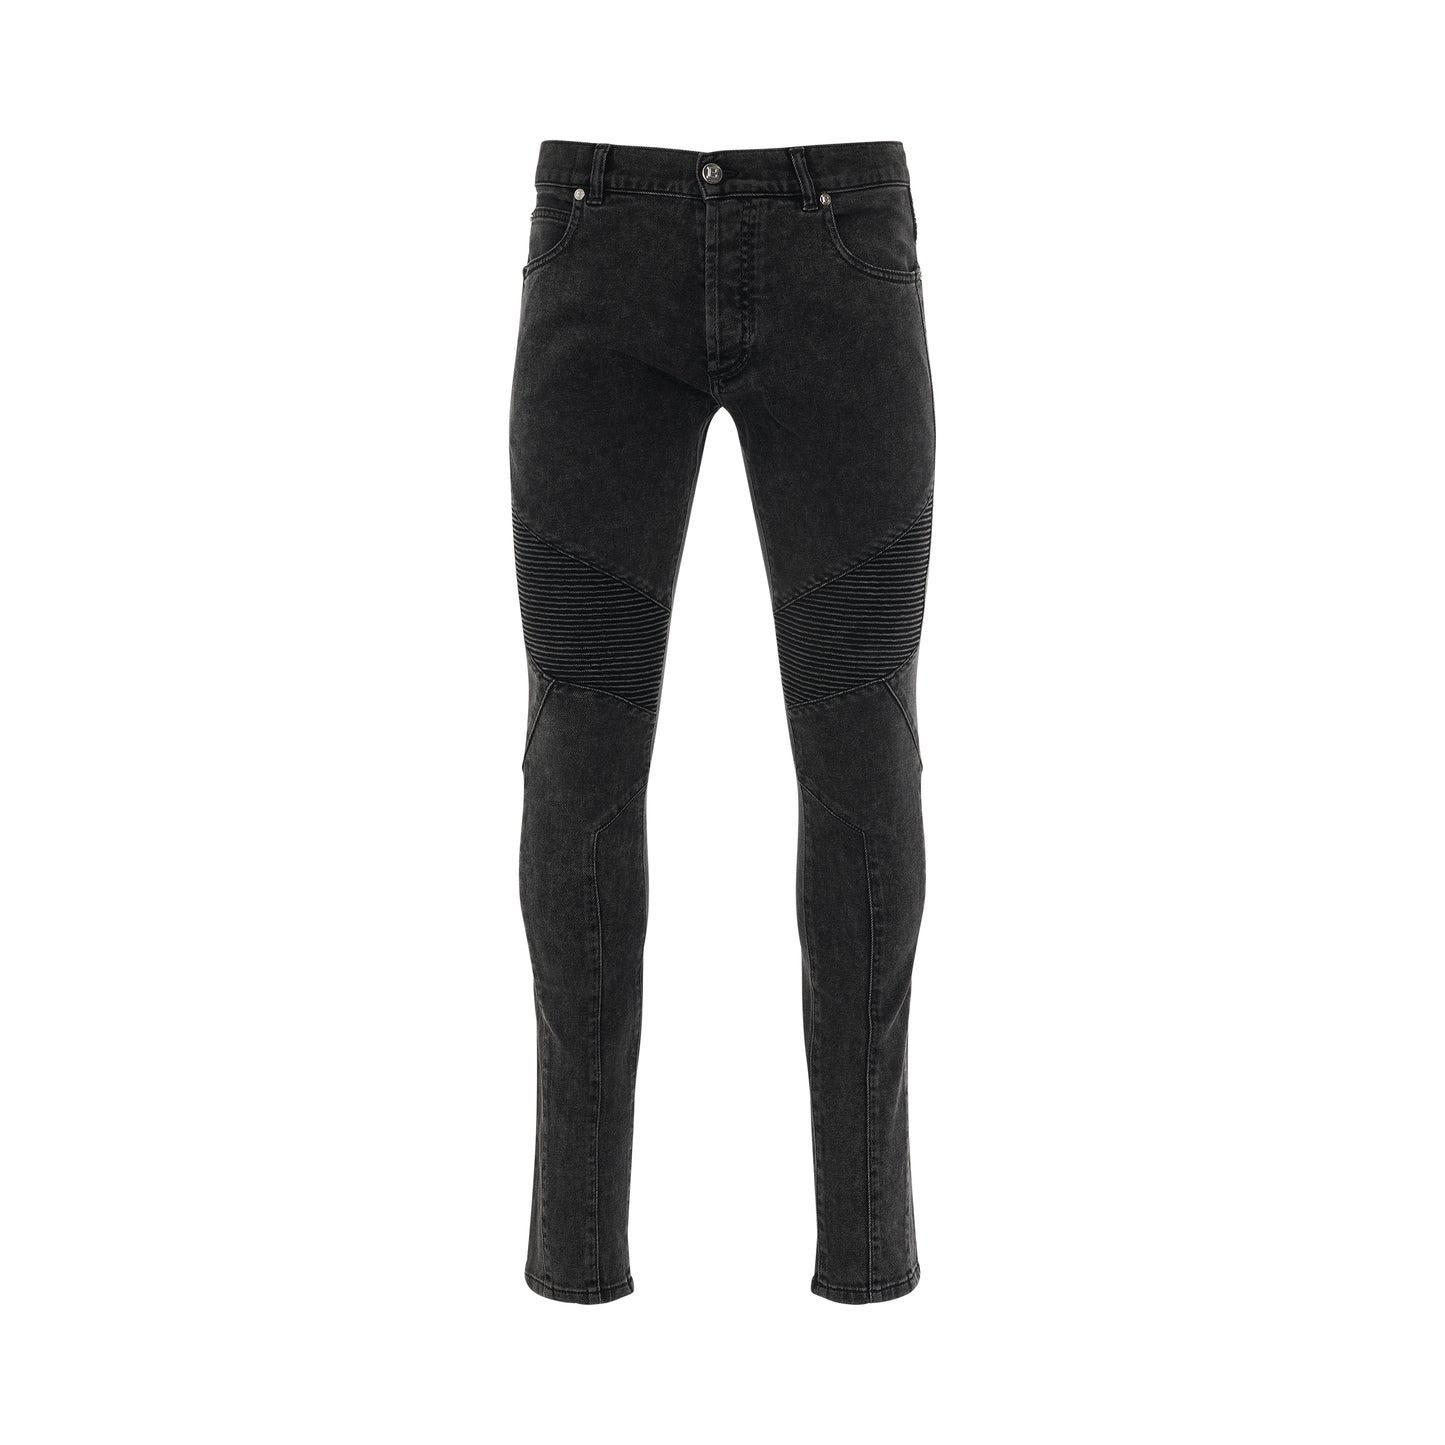 Ribbed Slim Multi-Cuts Jeans in Washed Black